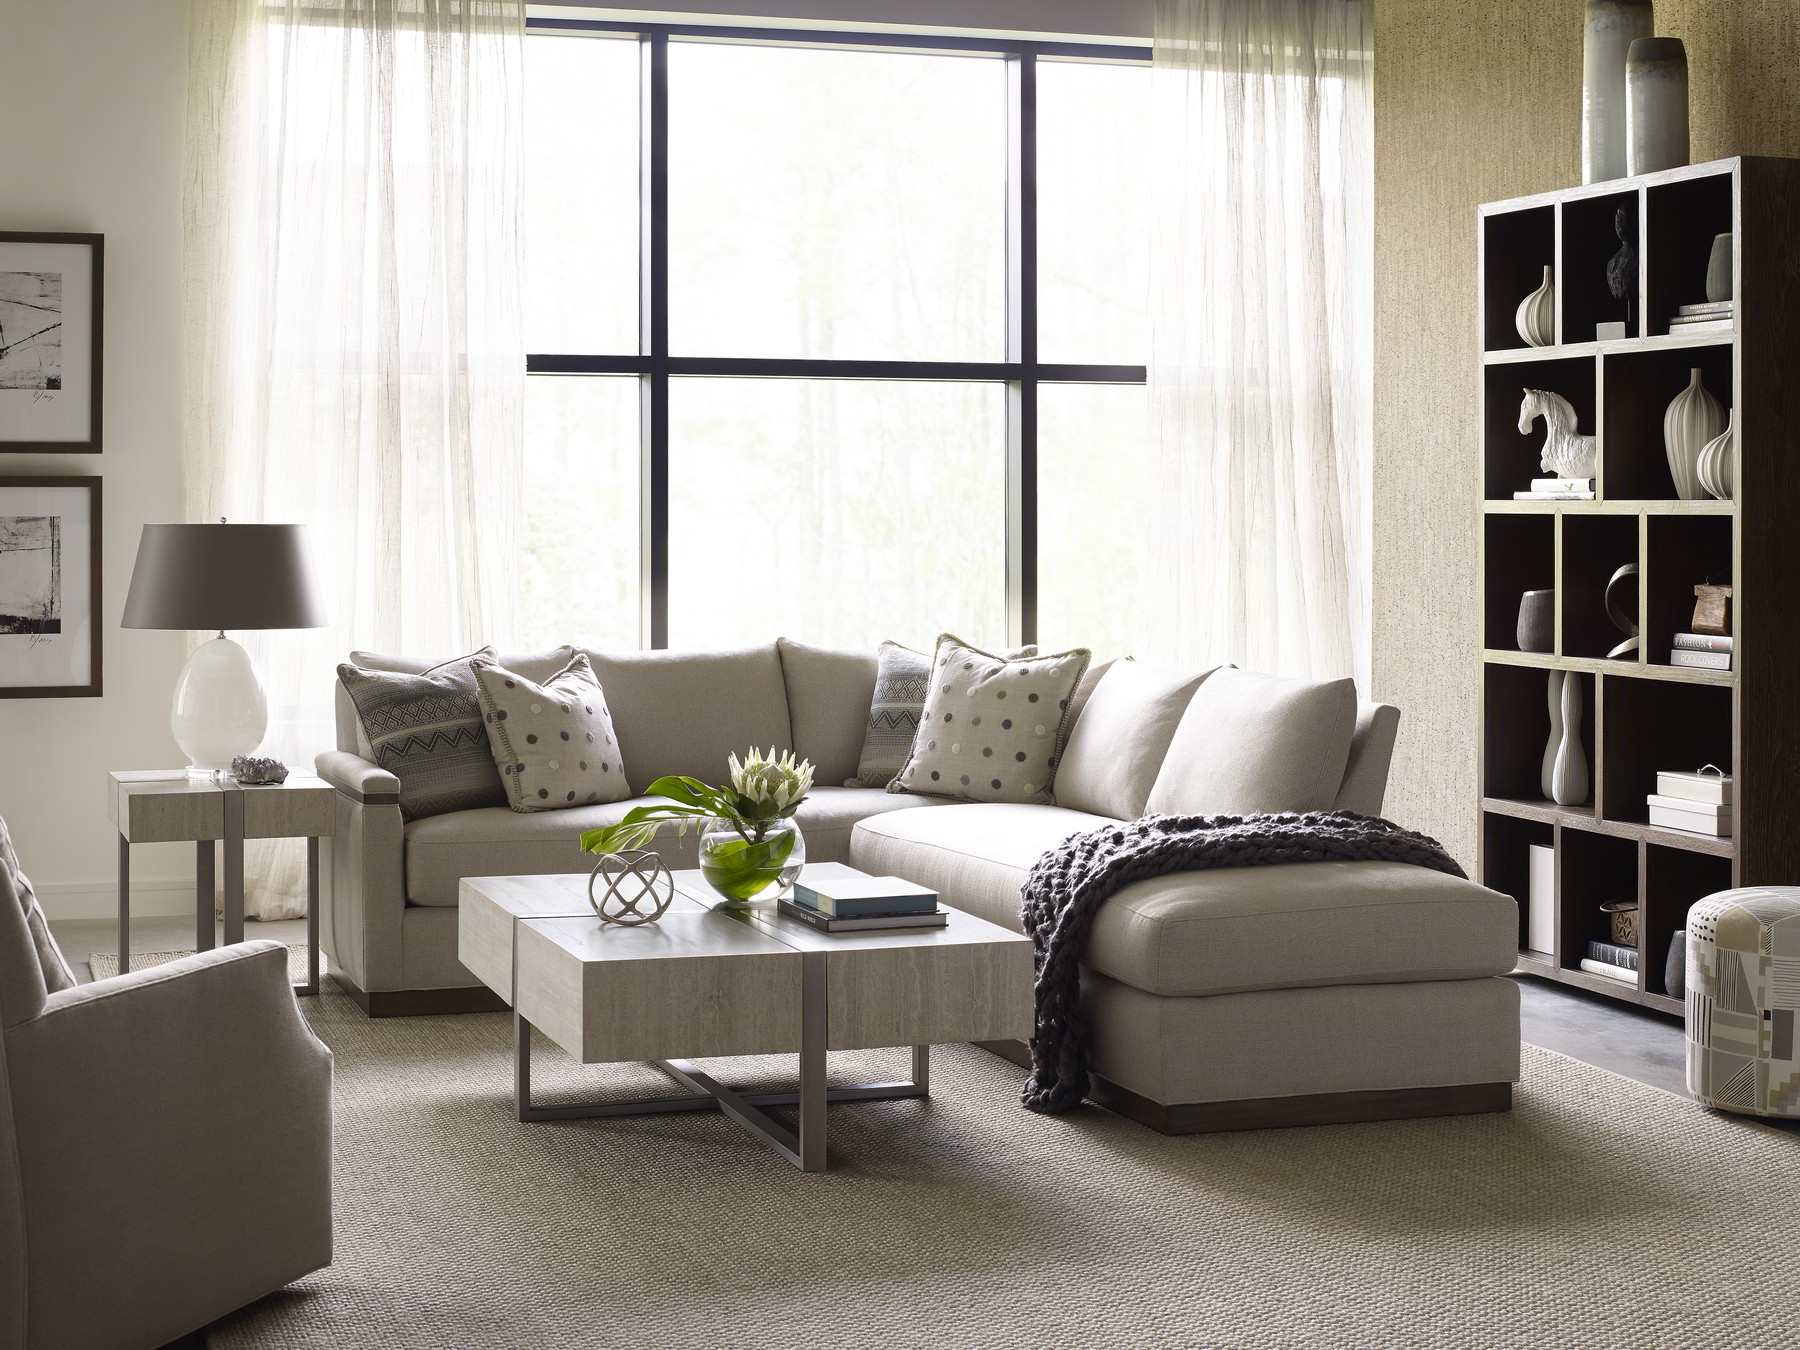 Vanguard Envision Sectional W Formation Seigerman S Furniture